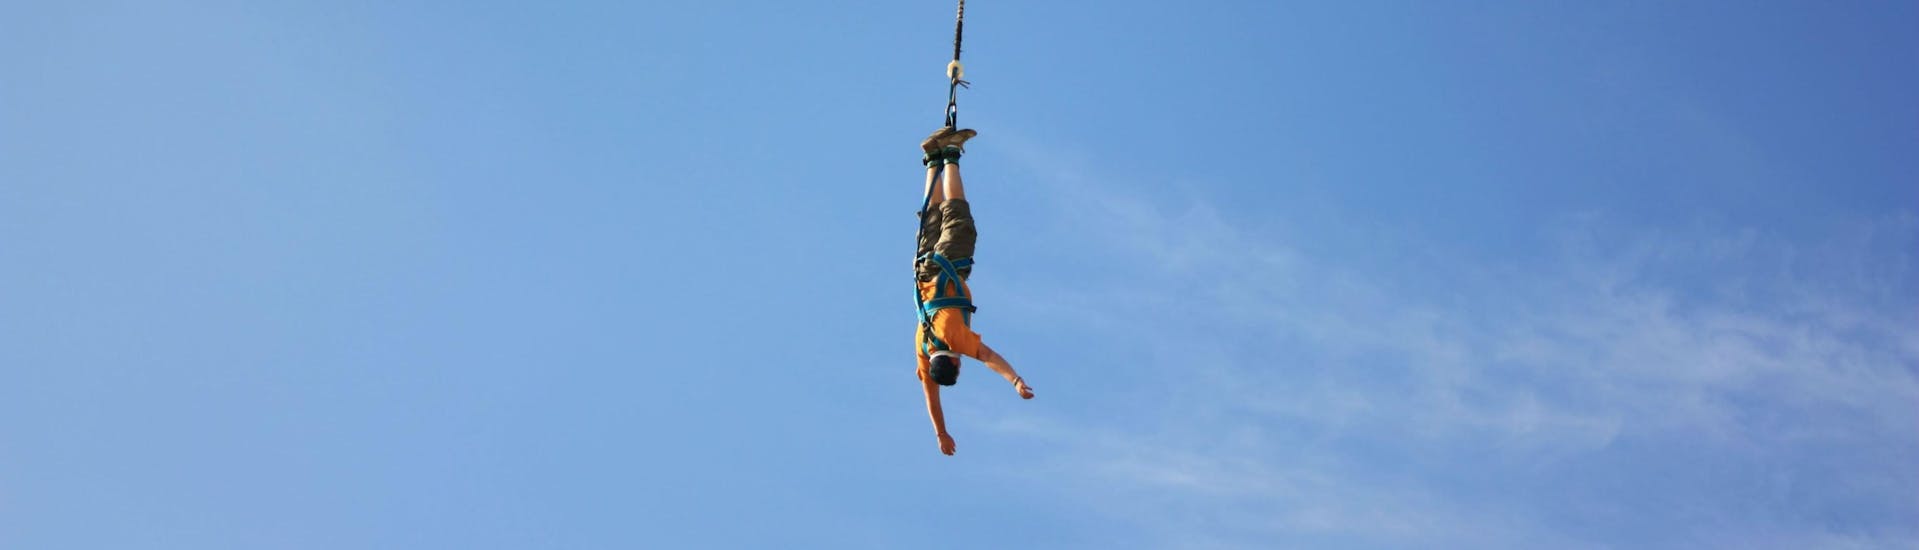 A man is bungee jumping from Viaduc Banne (40m) under a supervision of an instructor of Elastic Crocodil Bungee.